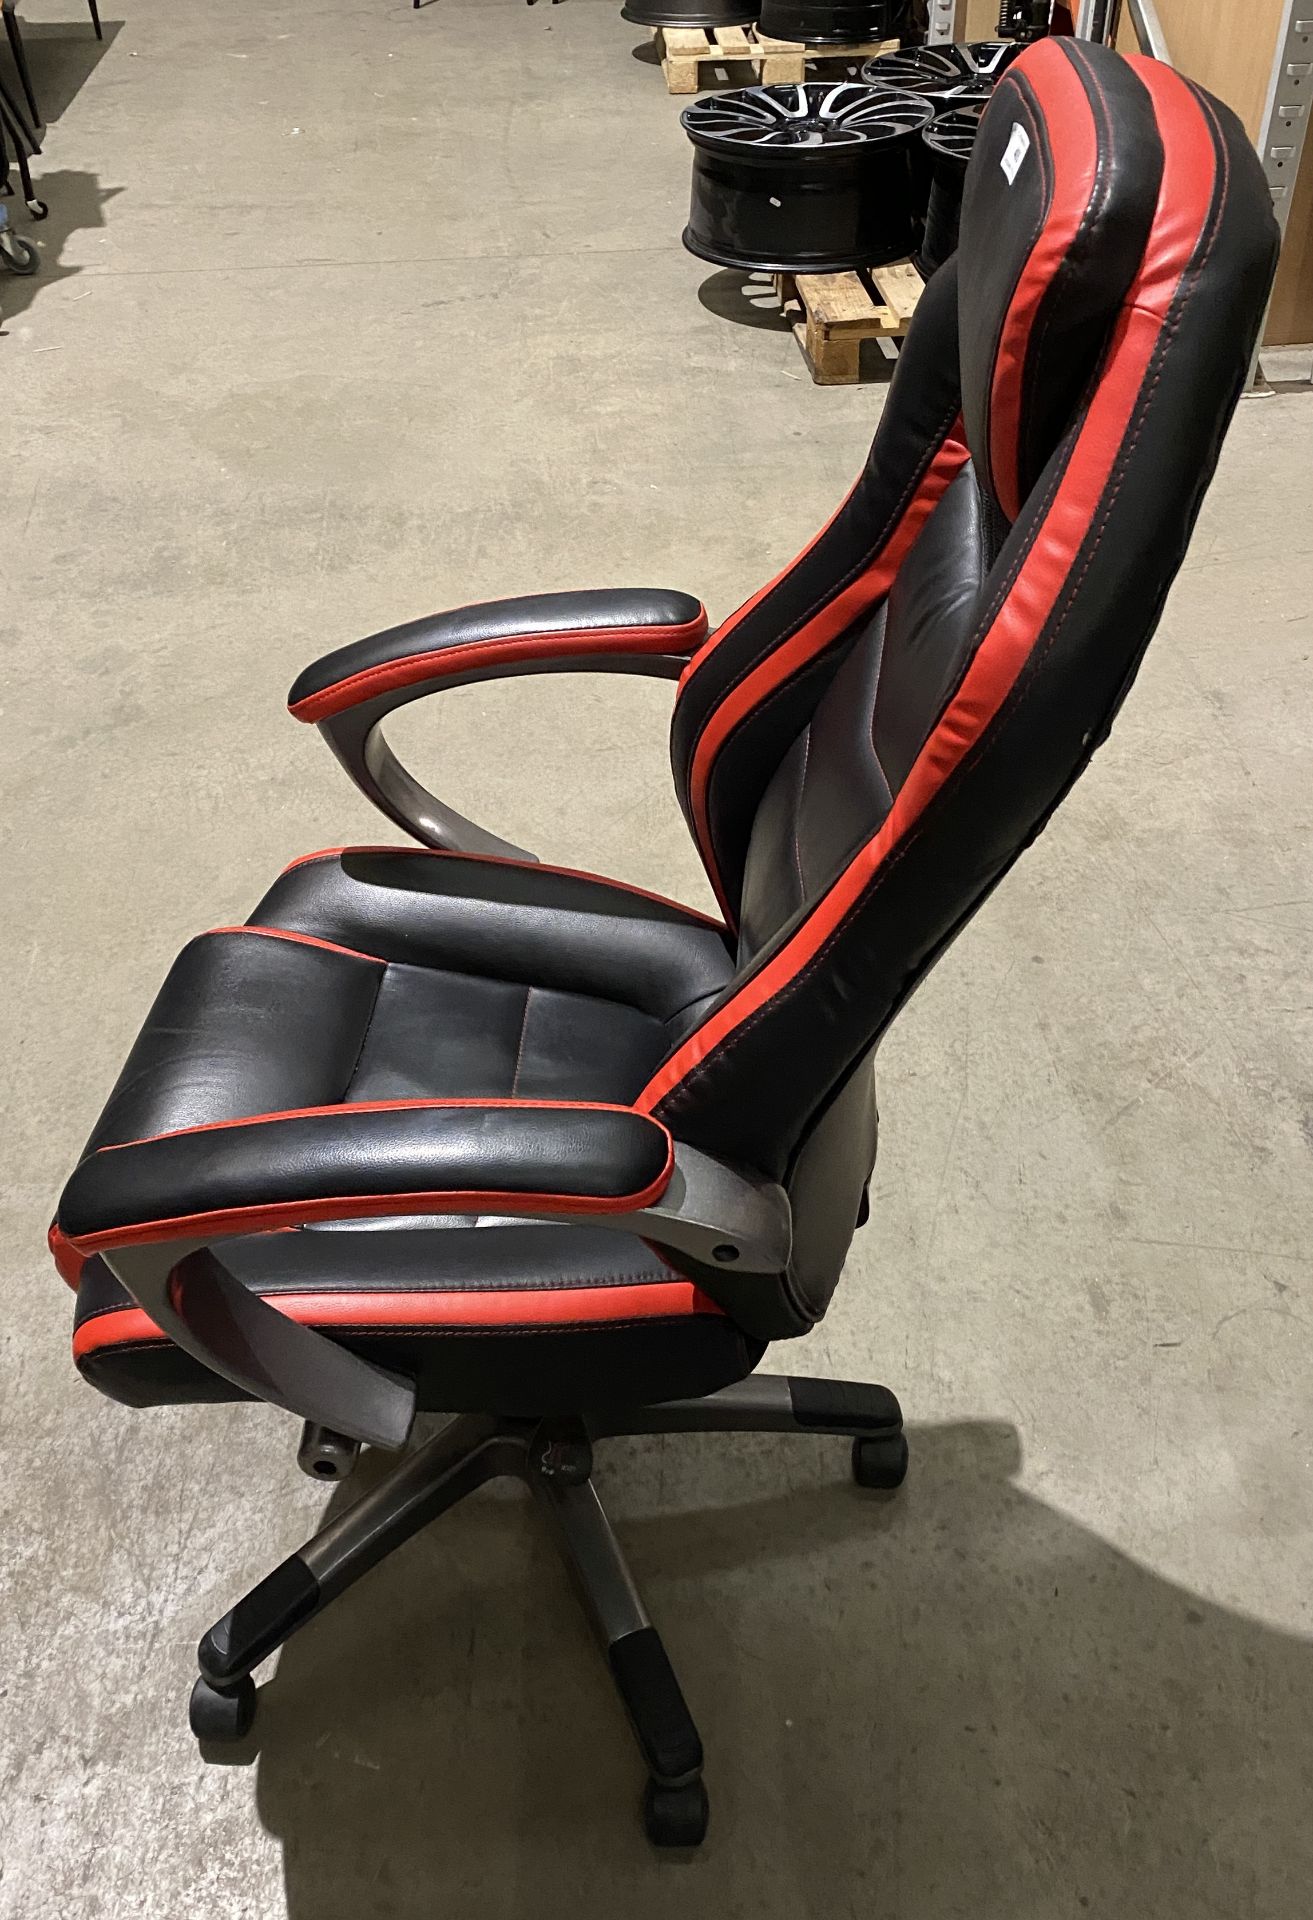 Black and red leather upholstered swivel armchair/gaming chair (Saleroom location: Aisle 1) - Image 3 of 4